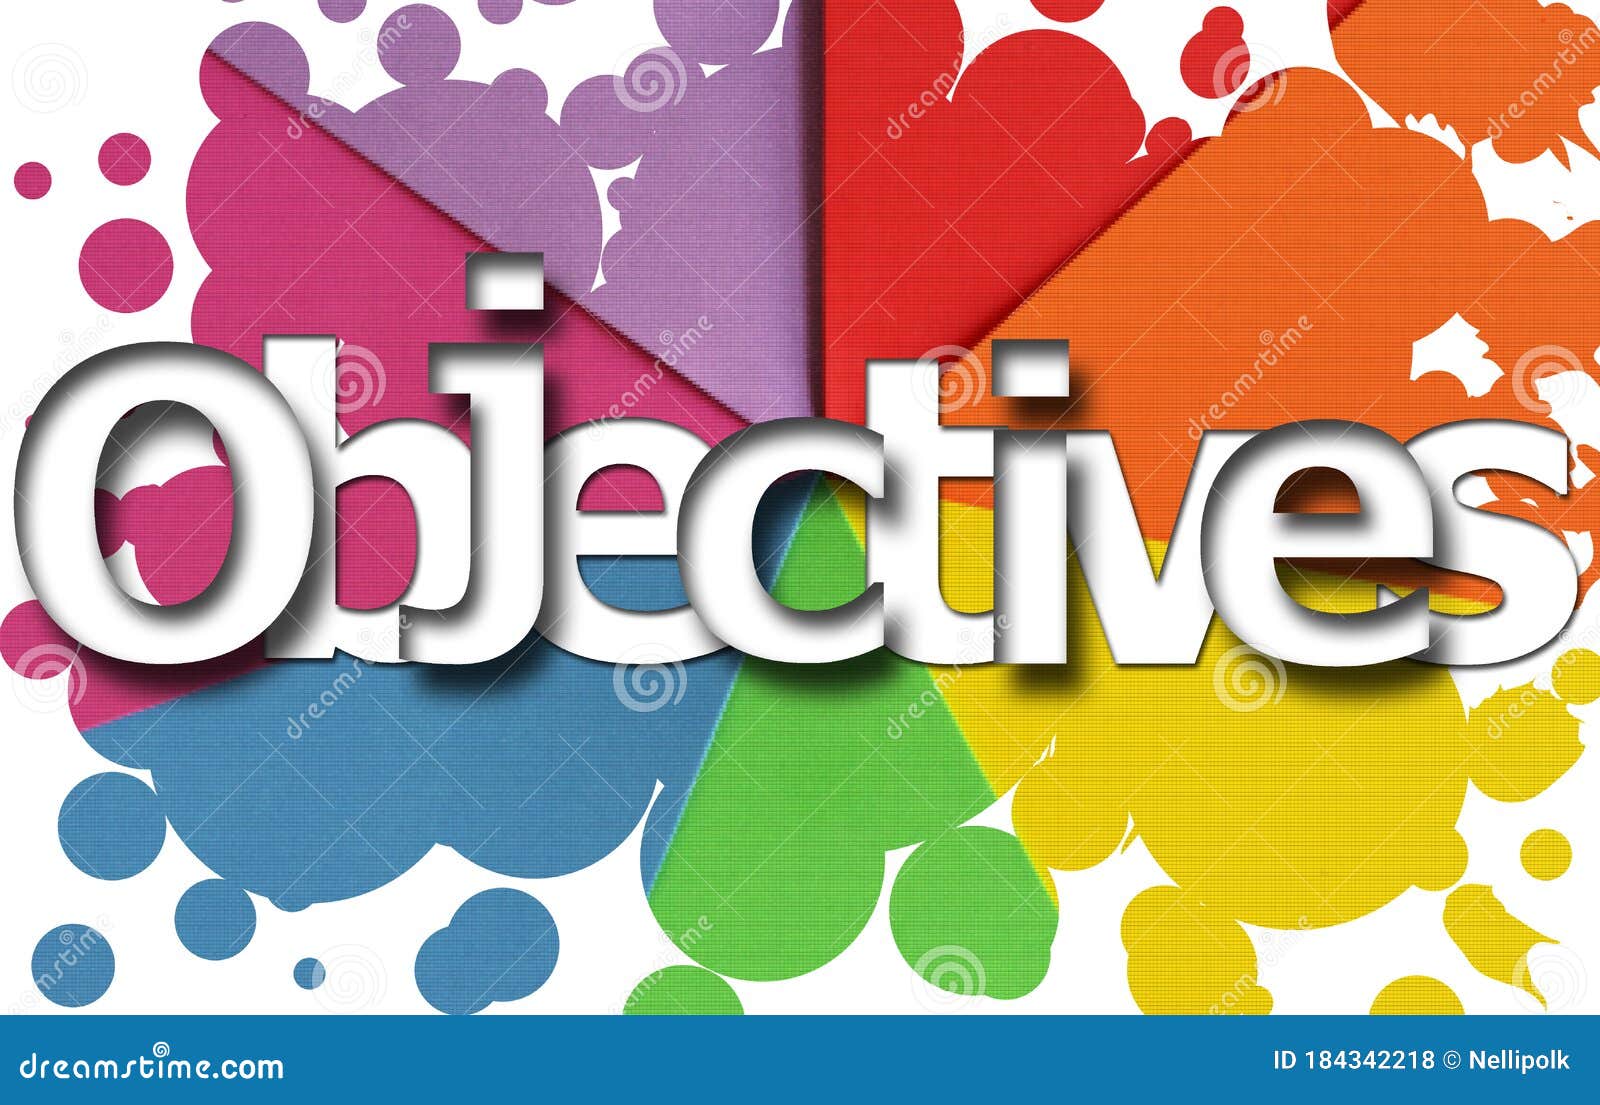 words for objectives in presentation